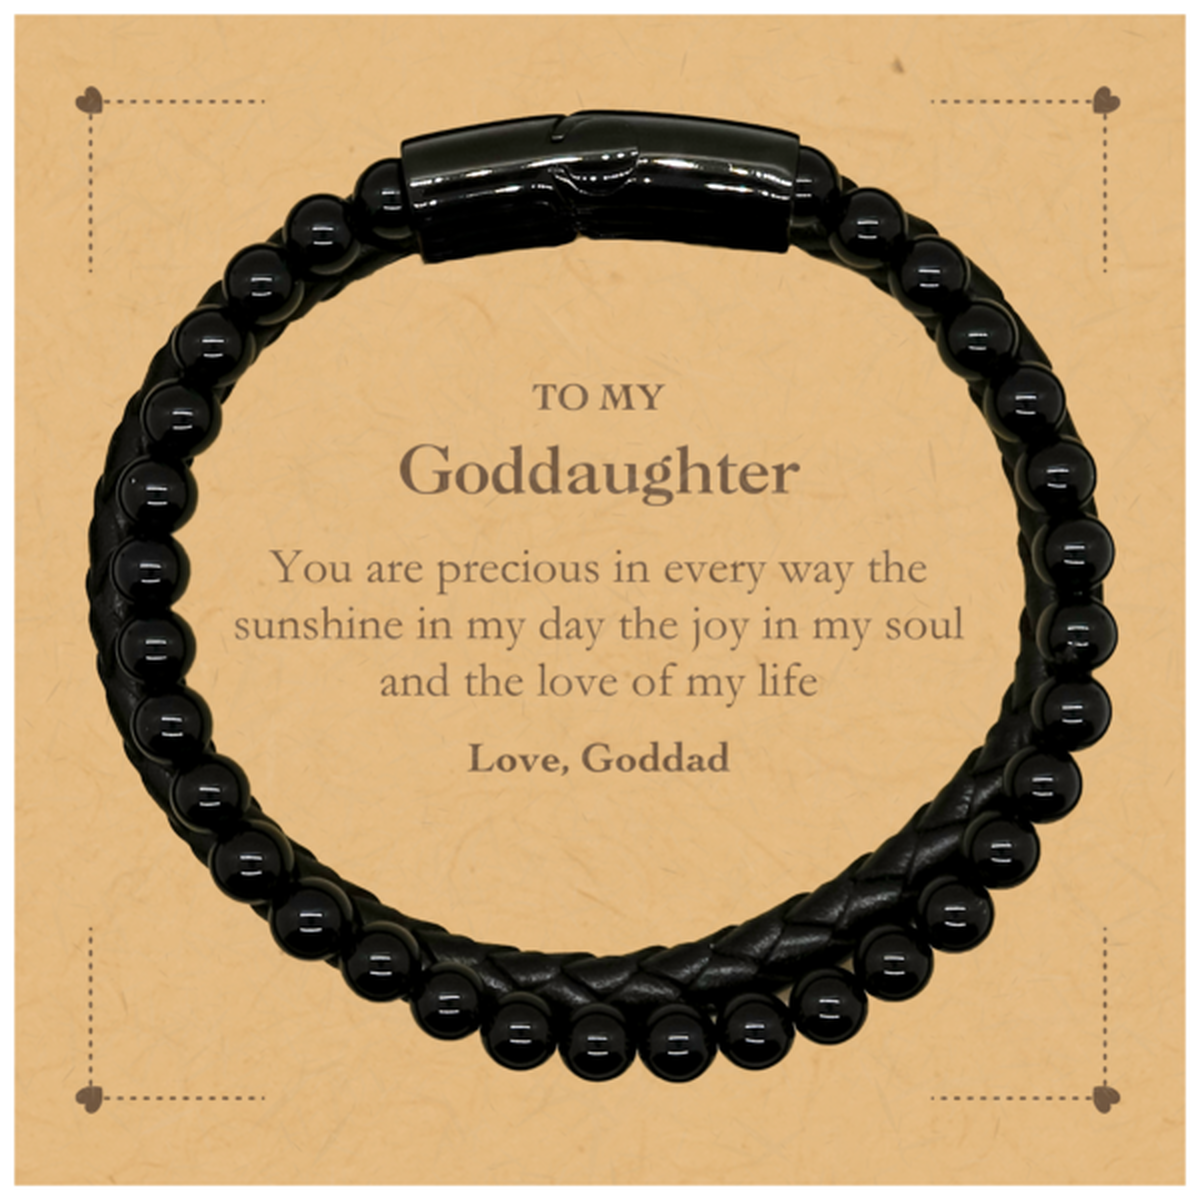 Graduation Gifts for Goddaughter Stone Leather Bracelets Present from Goddad, Christmas Goddaughter Birthday Gifts Goddaughter You are precious in every way the sunshine in my day. Love, Goddad